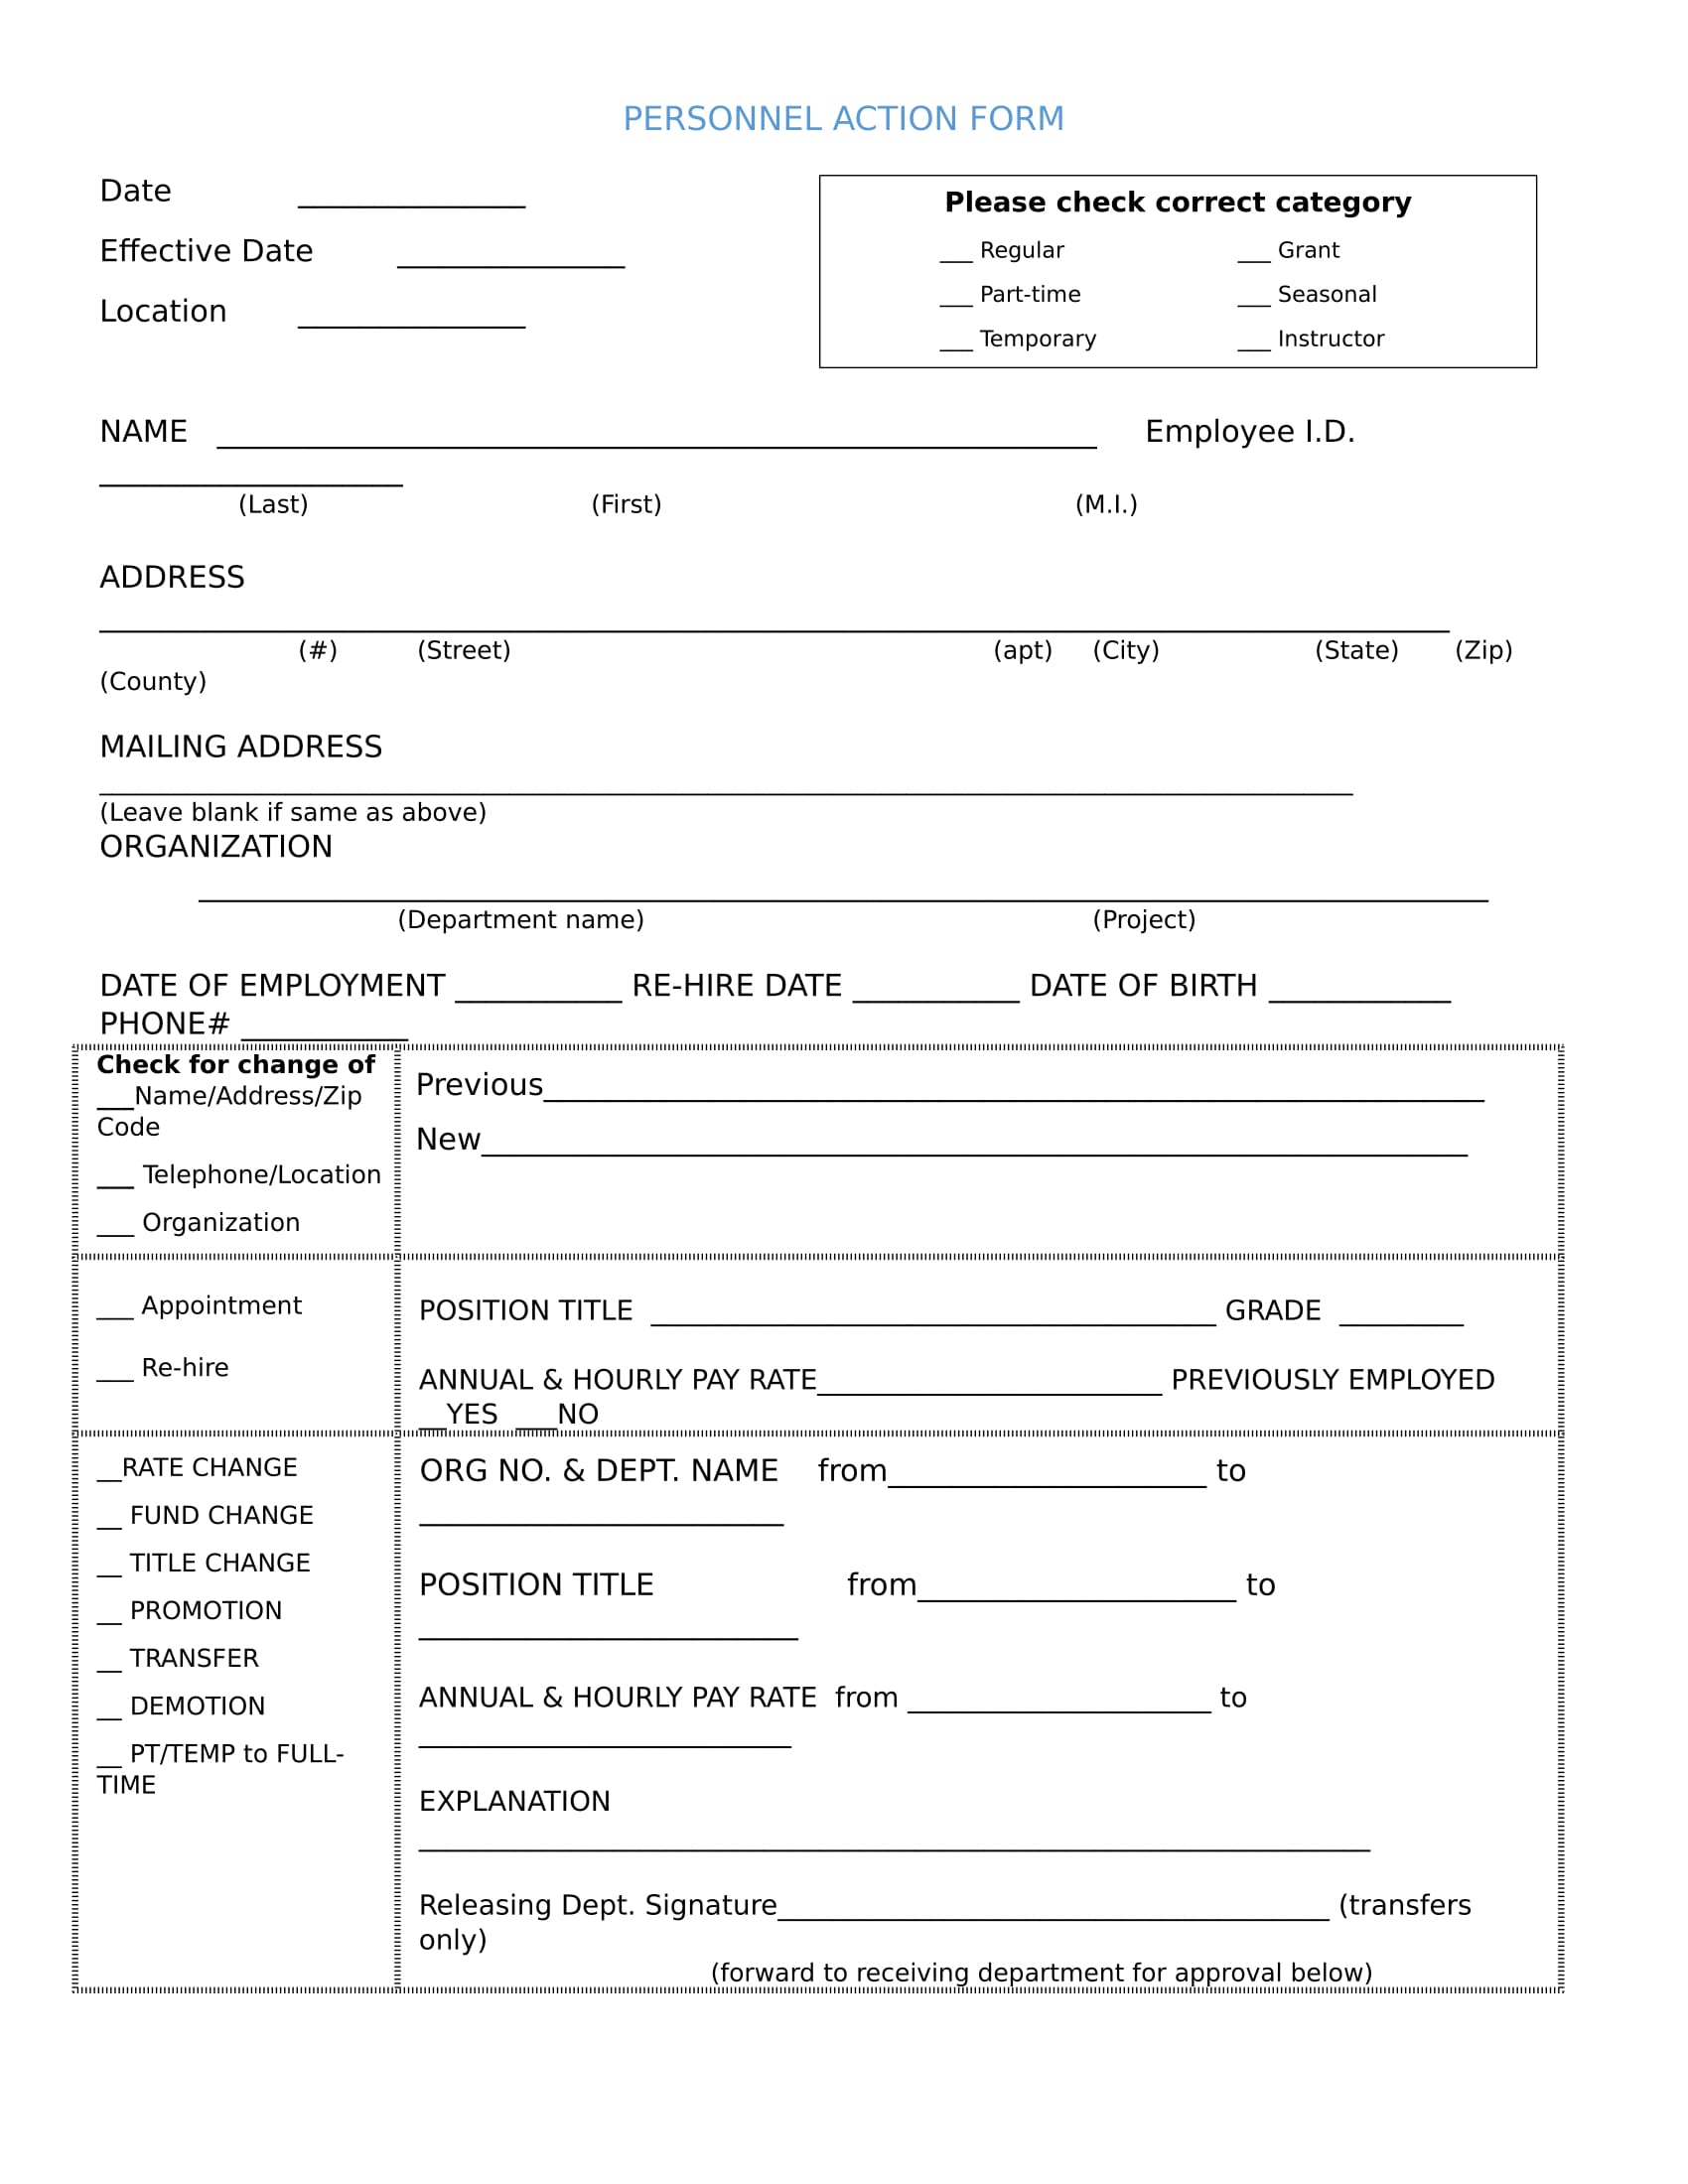 Free 28 Personnel Action Forms In Ms Word Pdf Excel Personnel action form template excel